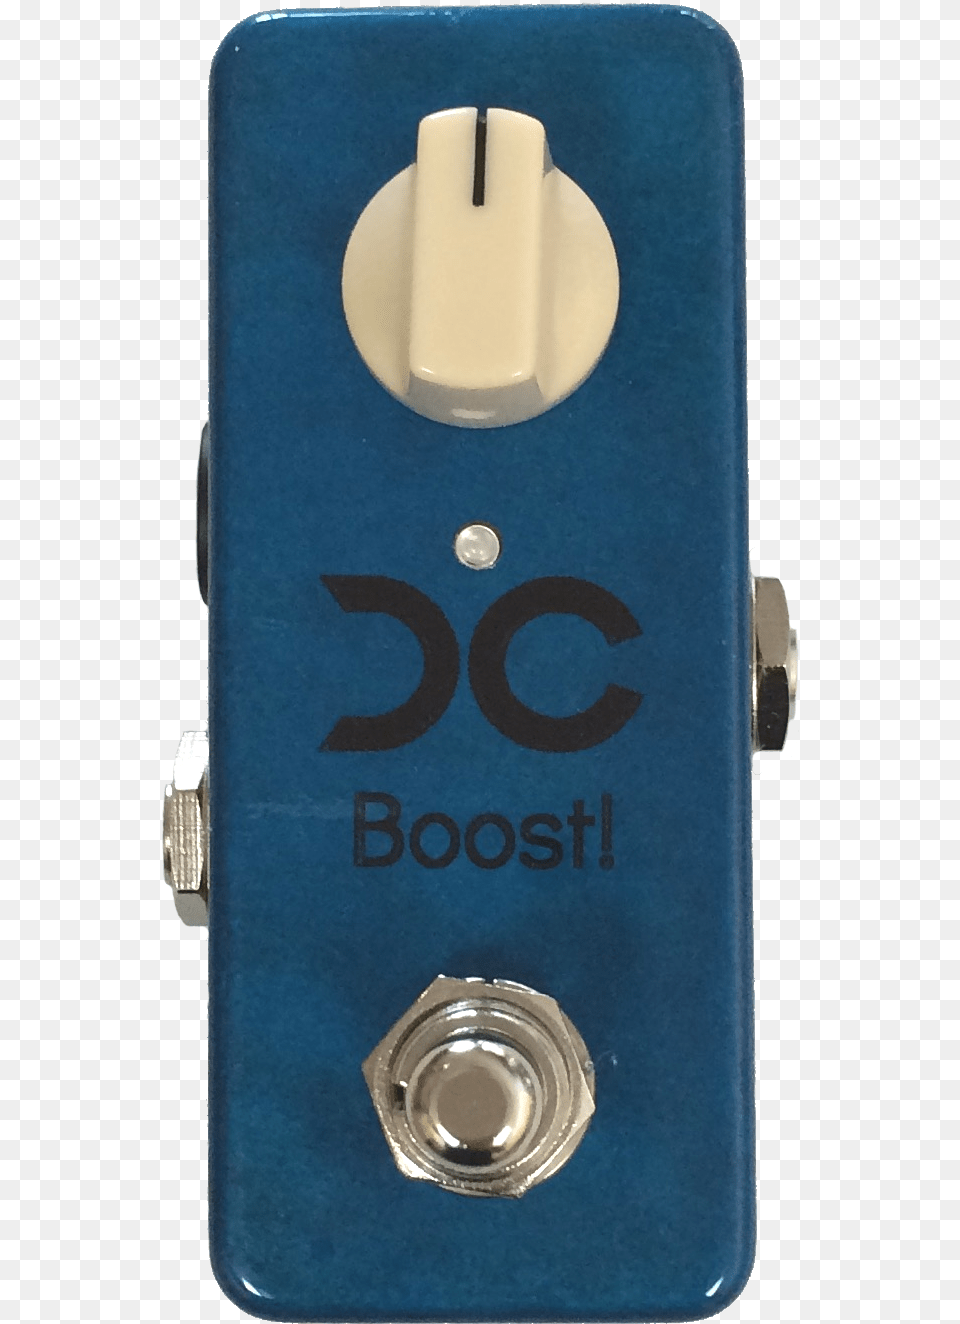 Dc Boost Gadget, Electrical Device, Switch, Accessories, Jewelry Free Png Download